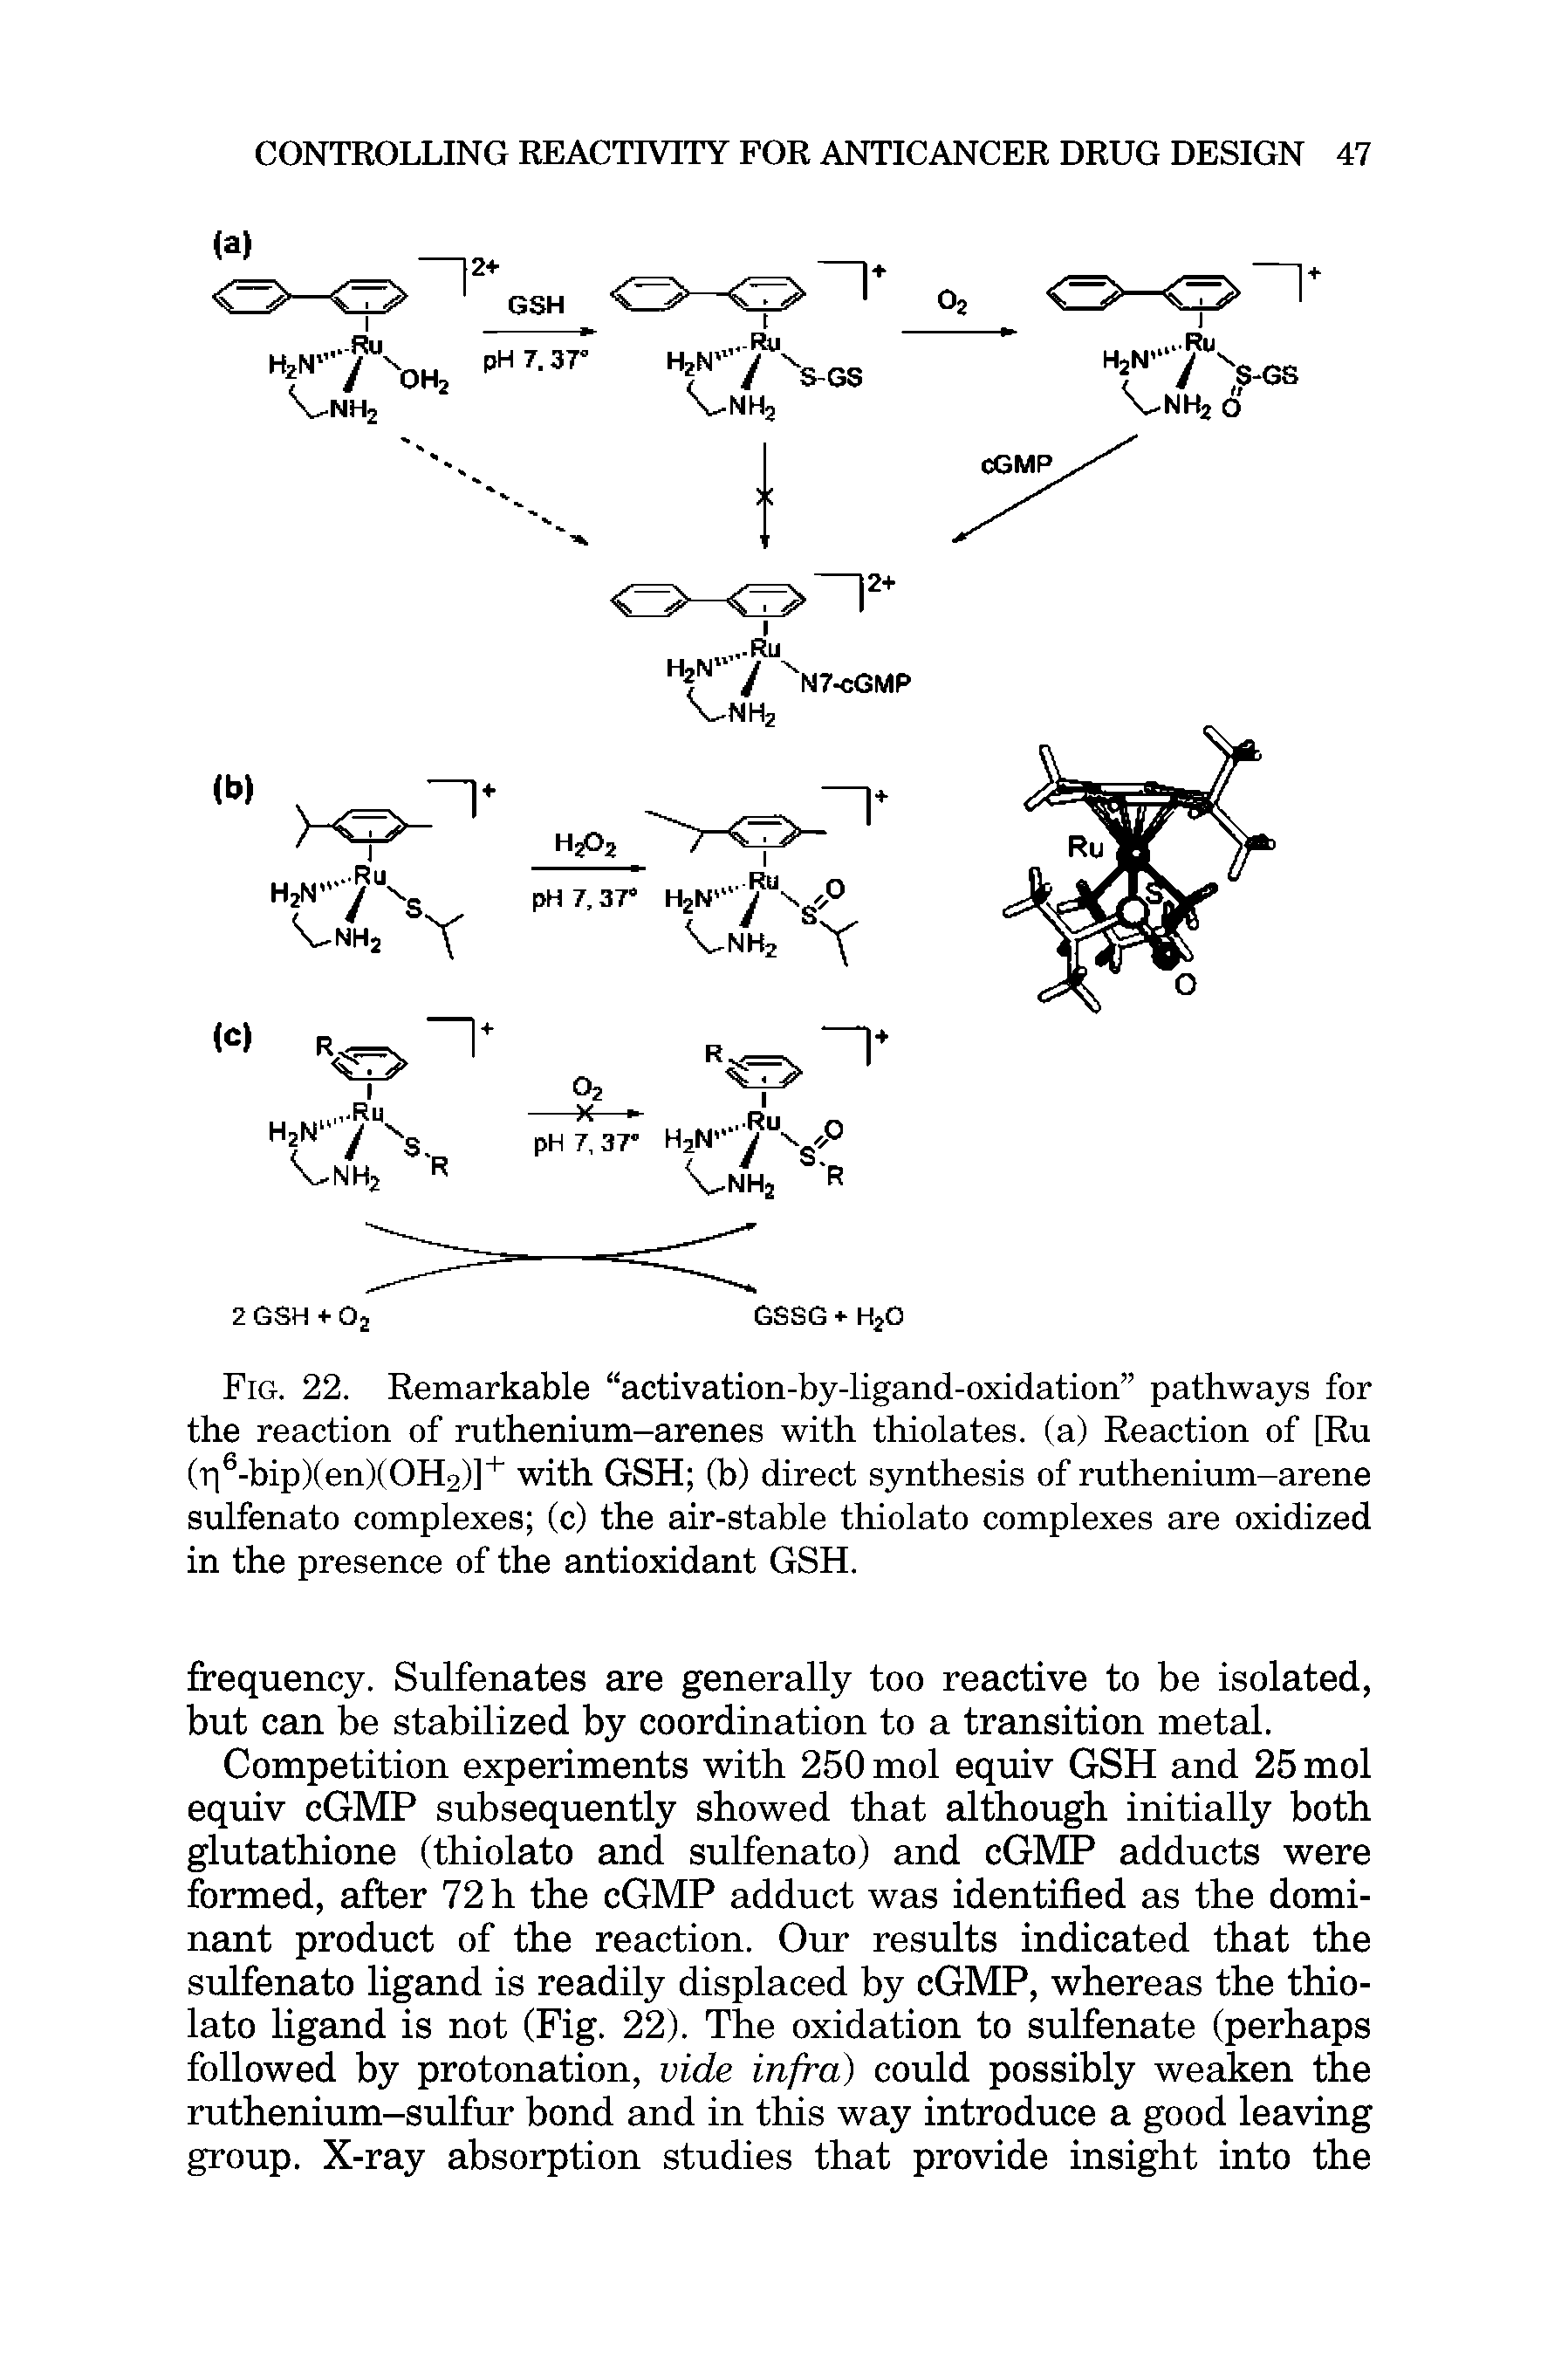 Fig. 22. Remarkable activation-by-ligand-oxidation pathways for the reaction of ruthenium-arenes with thiolates. (a) Reaction of [Ru (r 6-bip)(en)(OH2)]+ with GSH (b) direct synthesis of ruthenium-arene sulfenato complexes (c) the air-stable thiolato complexes are oxidized in the presence of the antioxidant GSH.